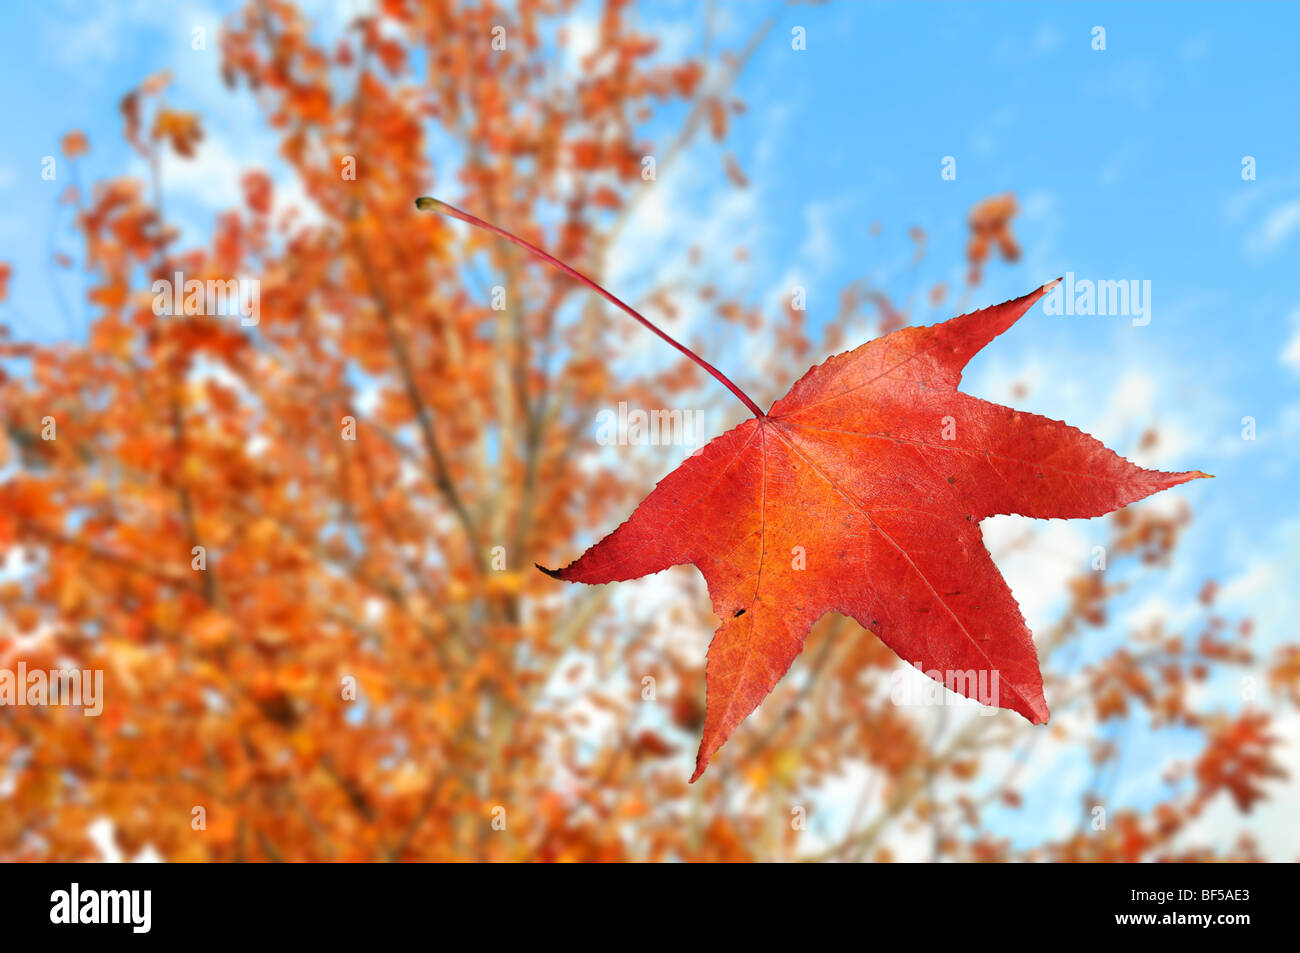 Leaf falling from tree during fall season Stock Photo